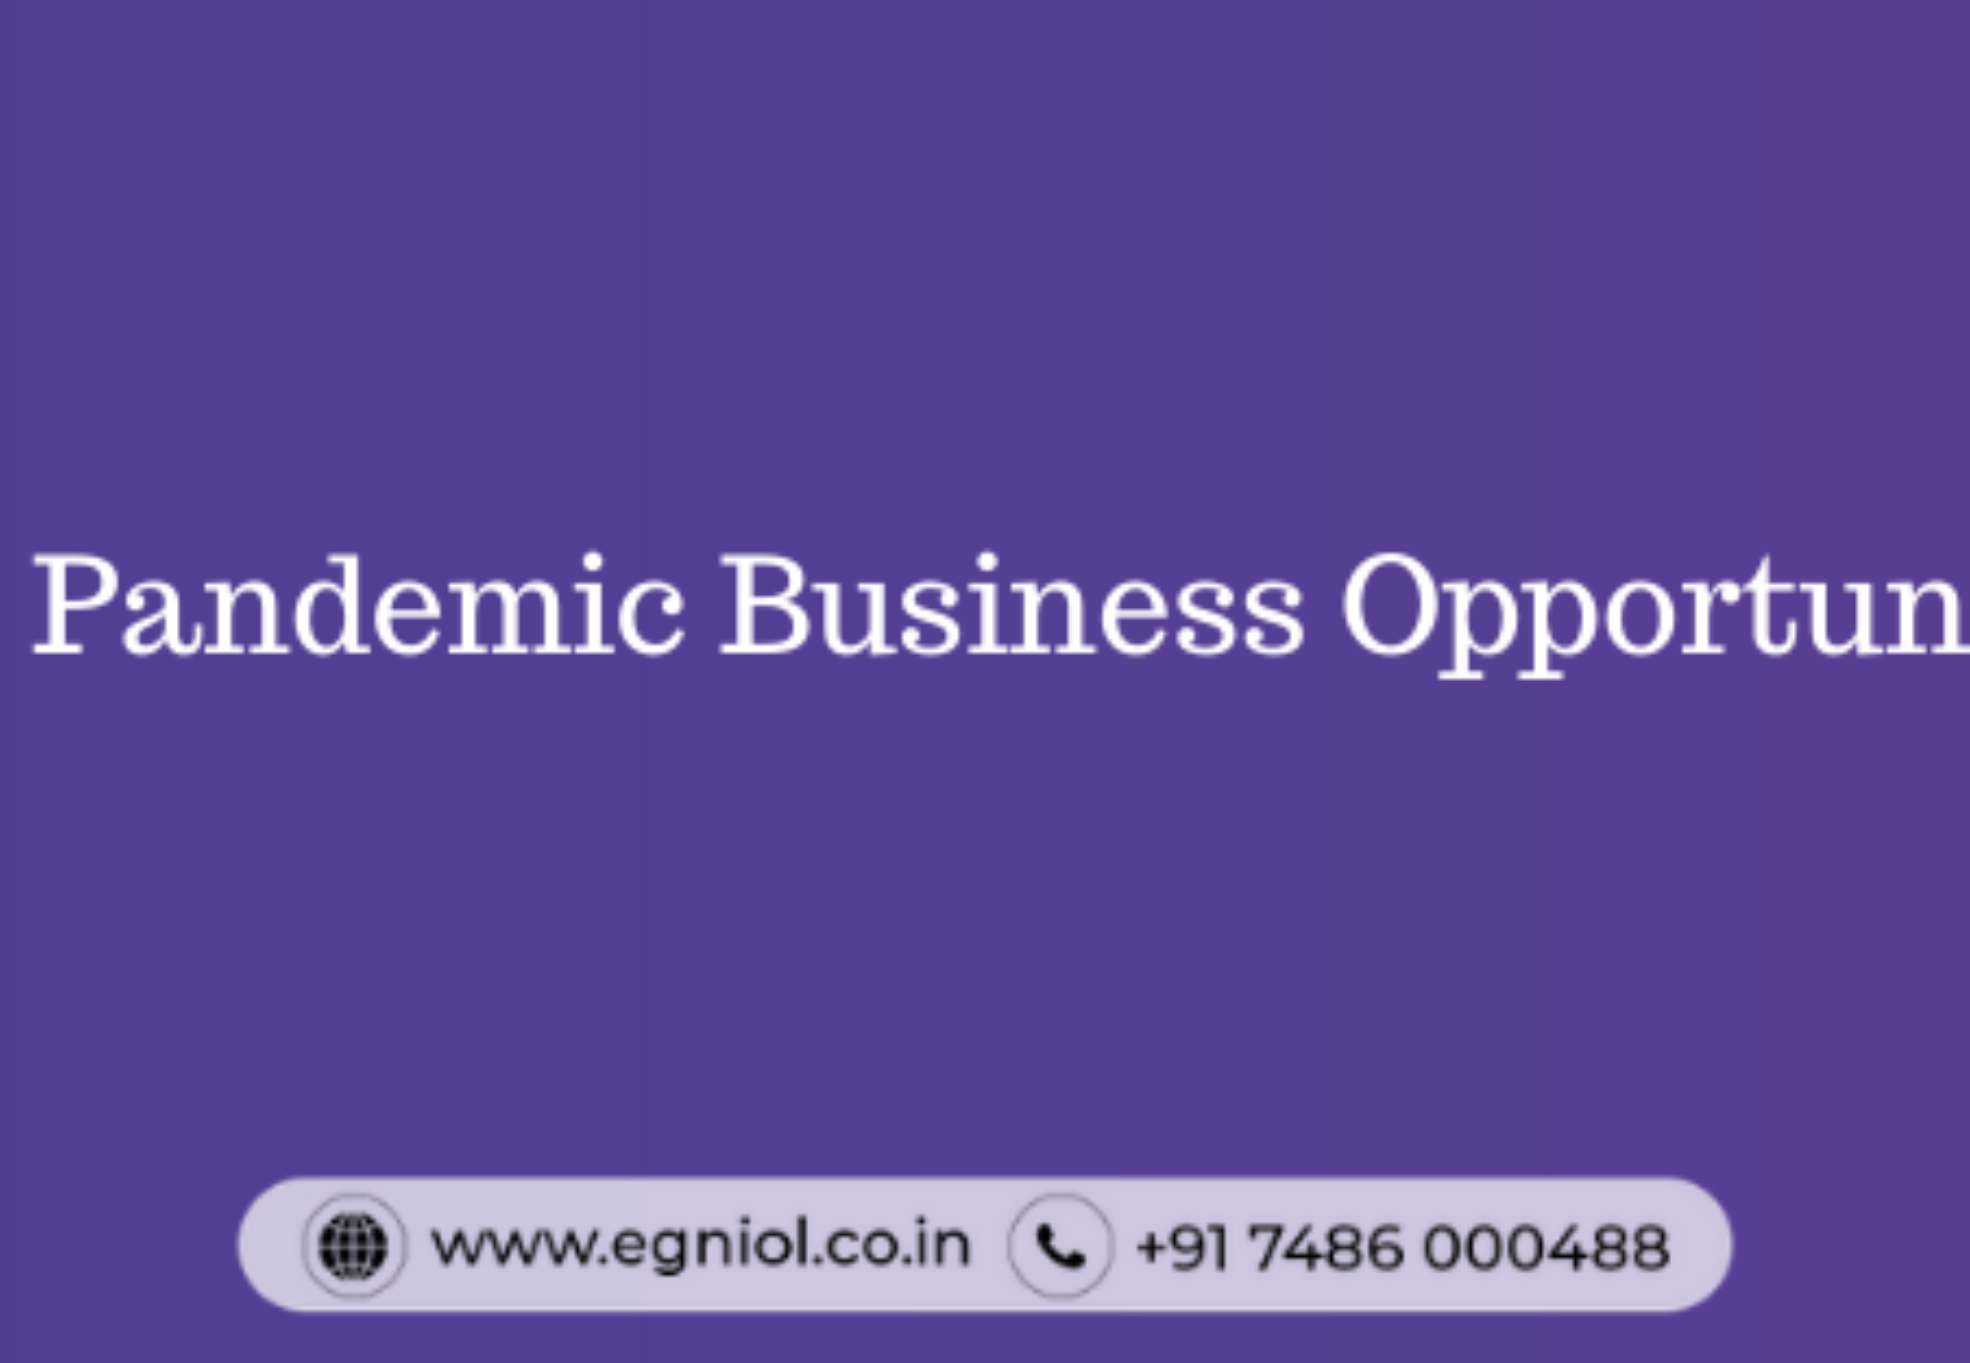 Post pandemic business opportunities - By Egniol